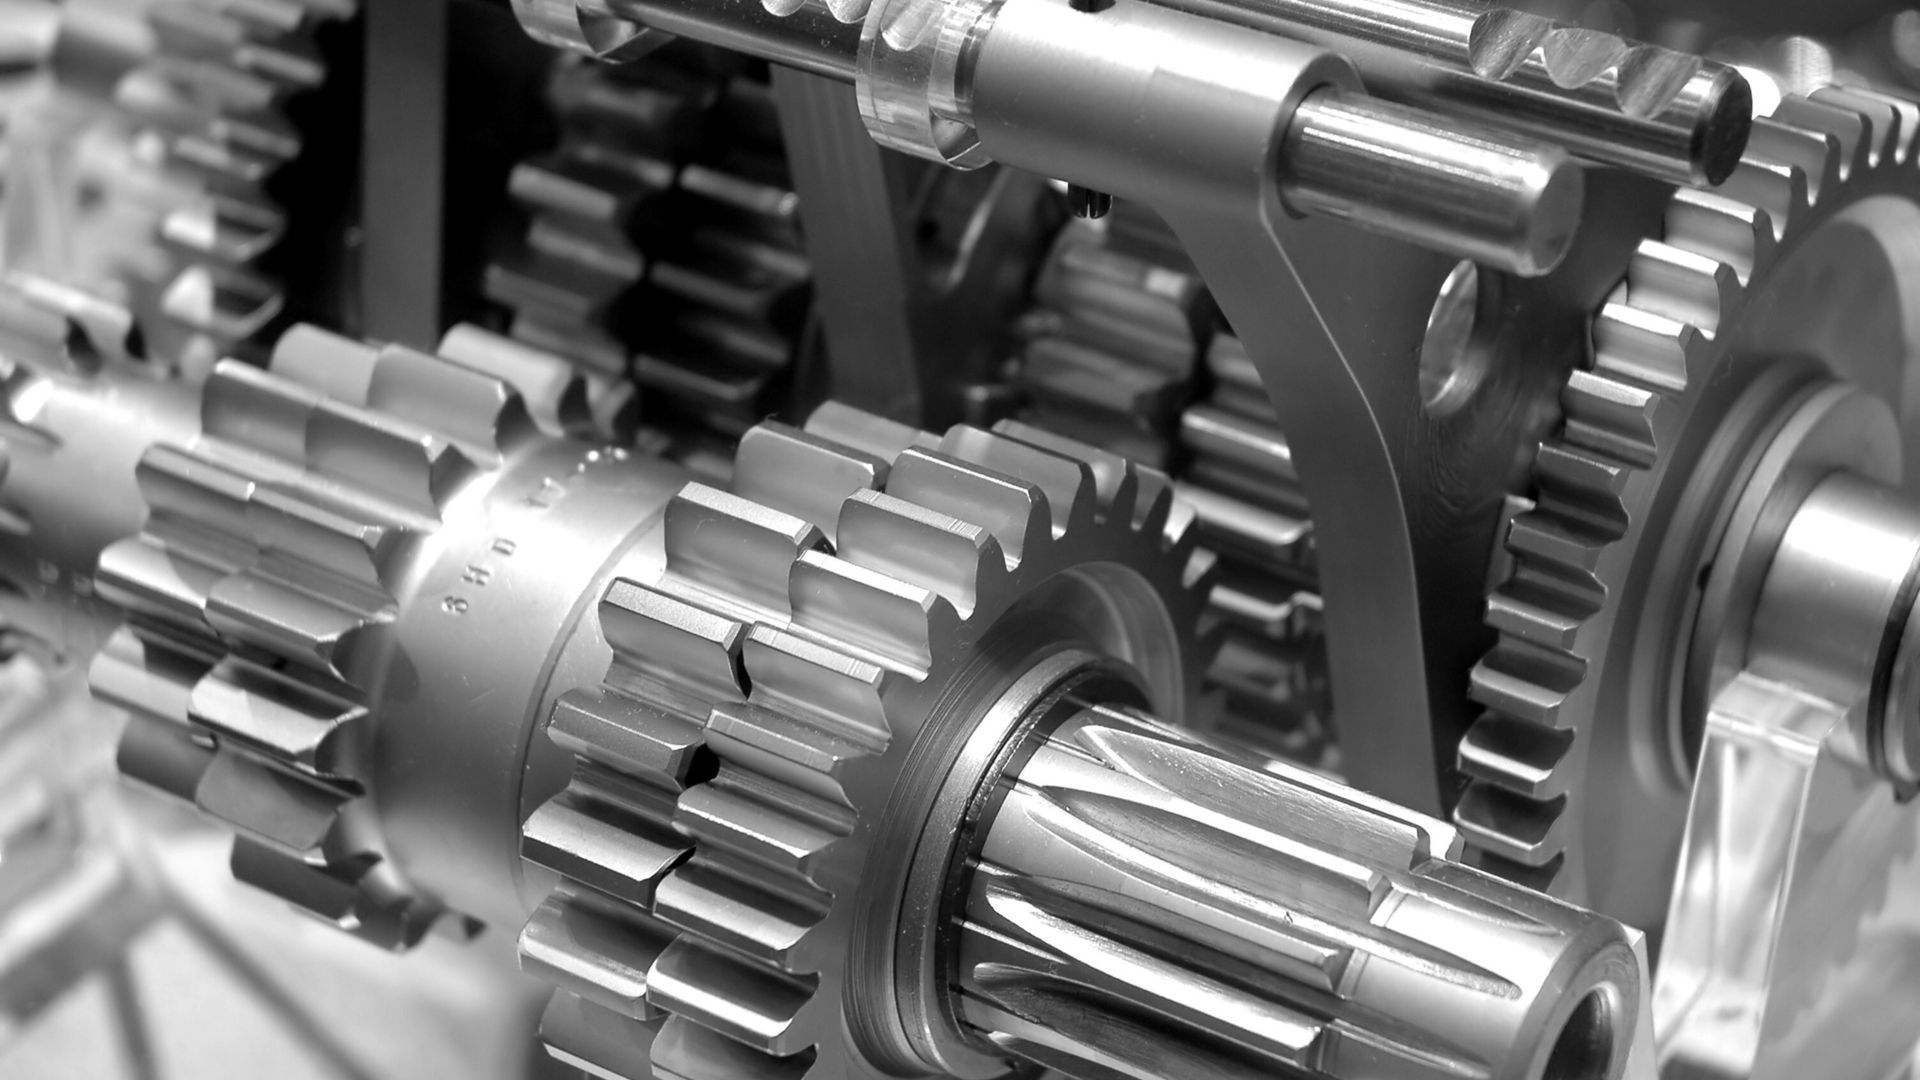 Gears In A Transmission. Mechanical engineering, Machine shop, Industrial gears